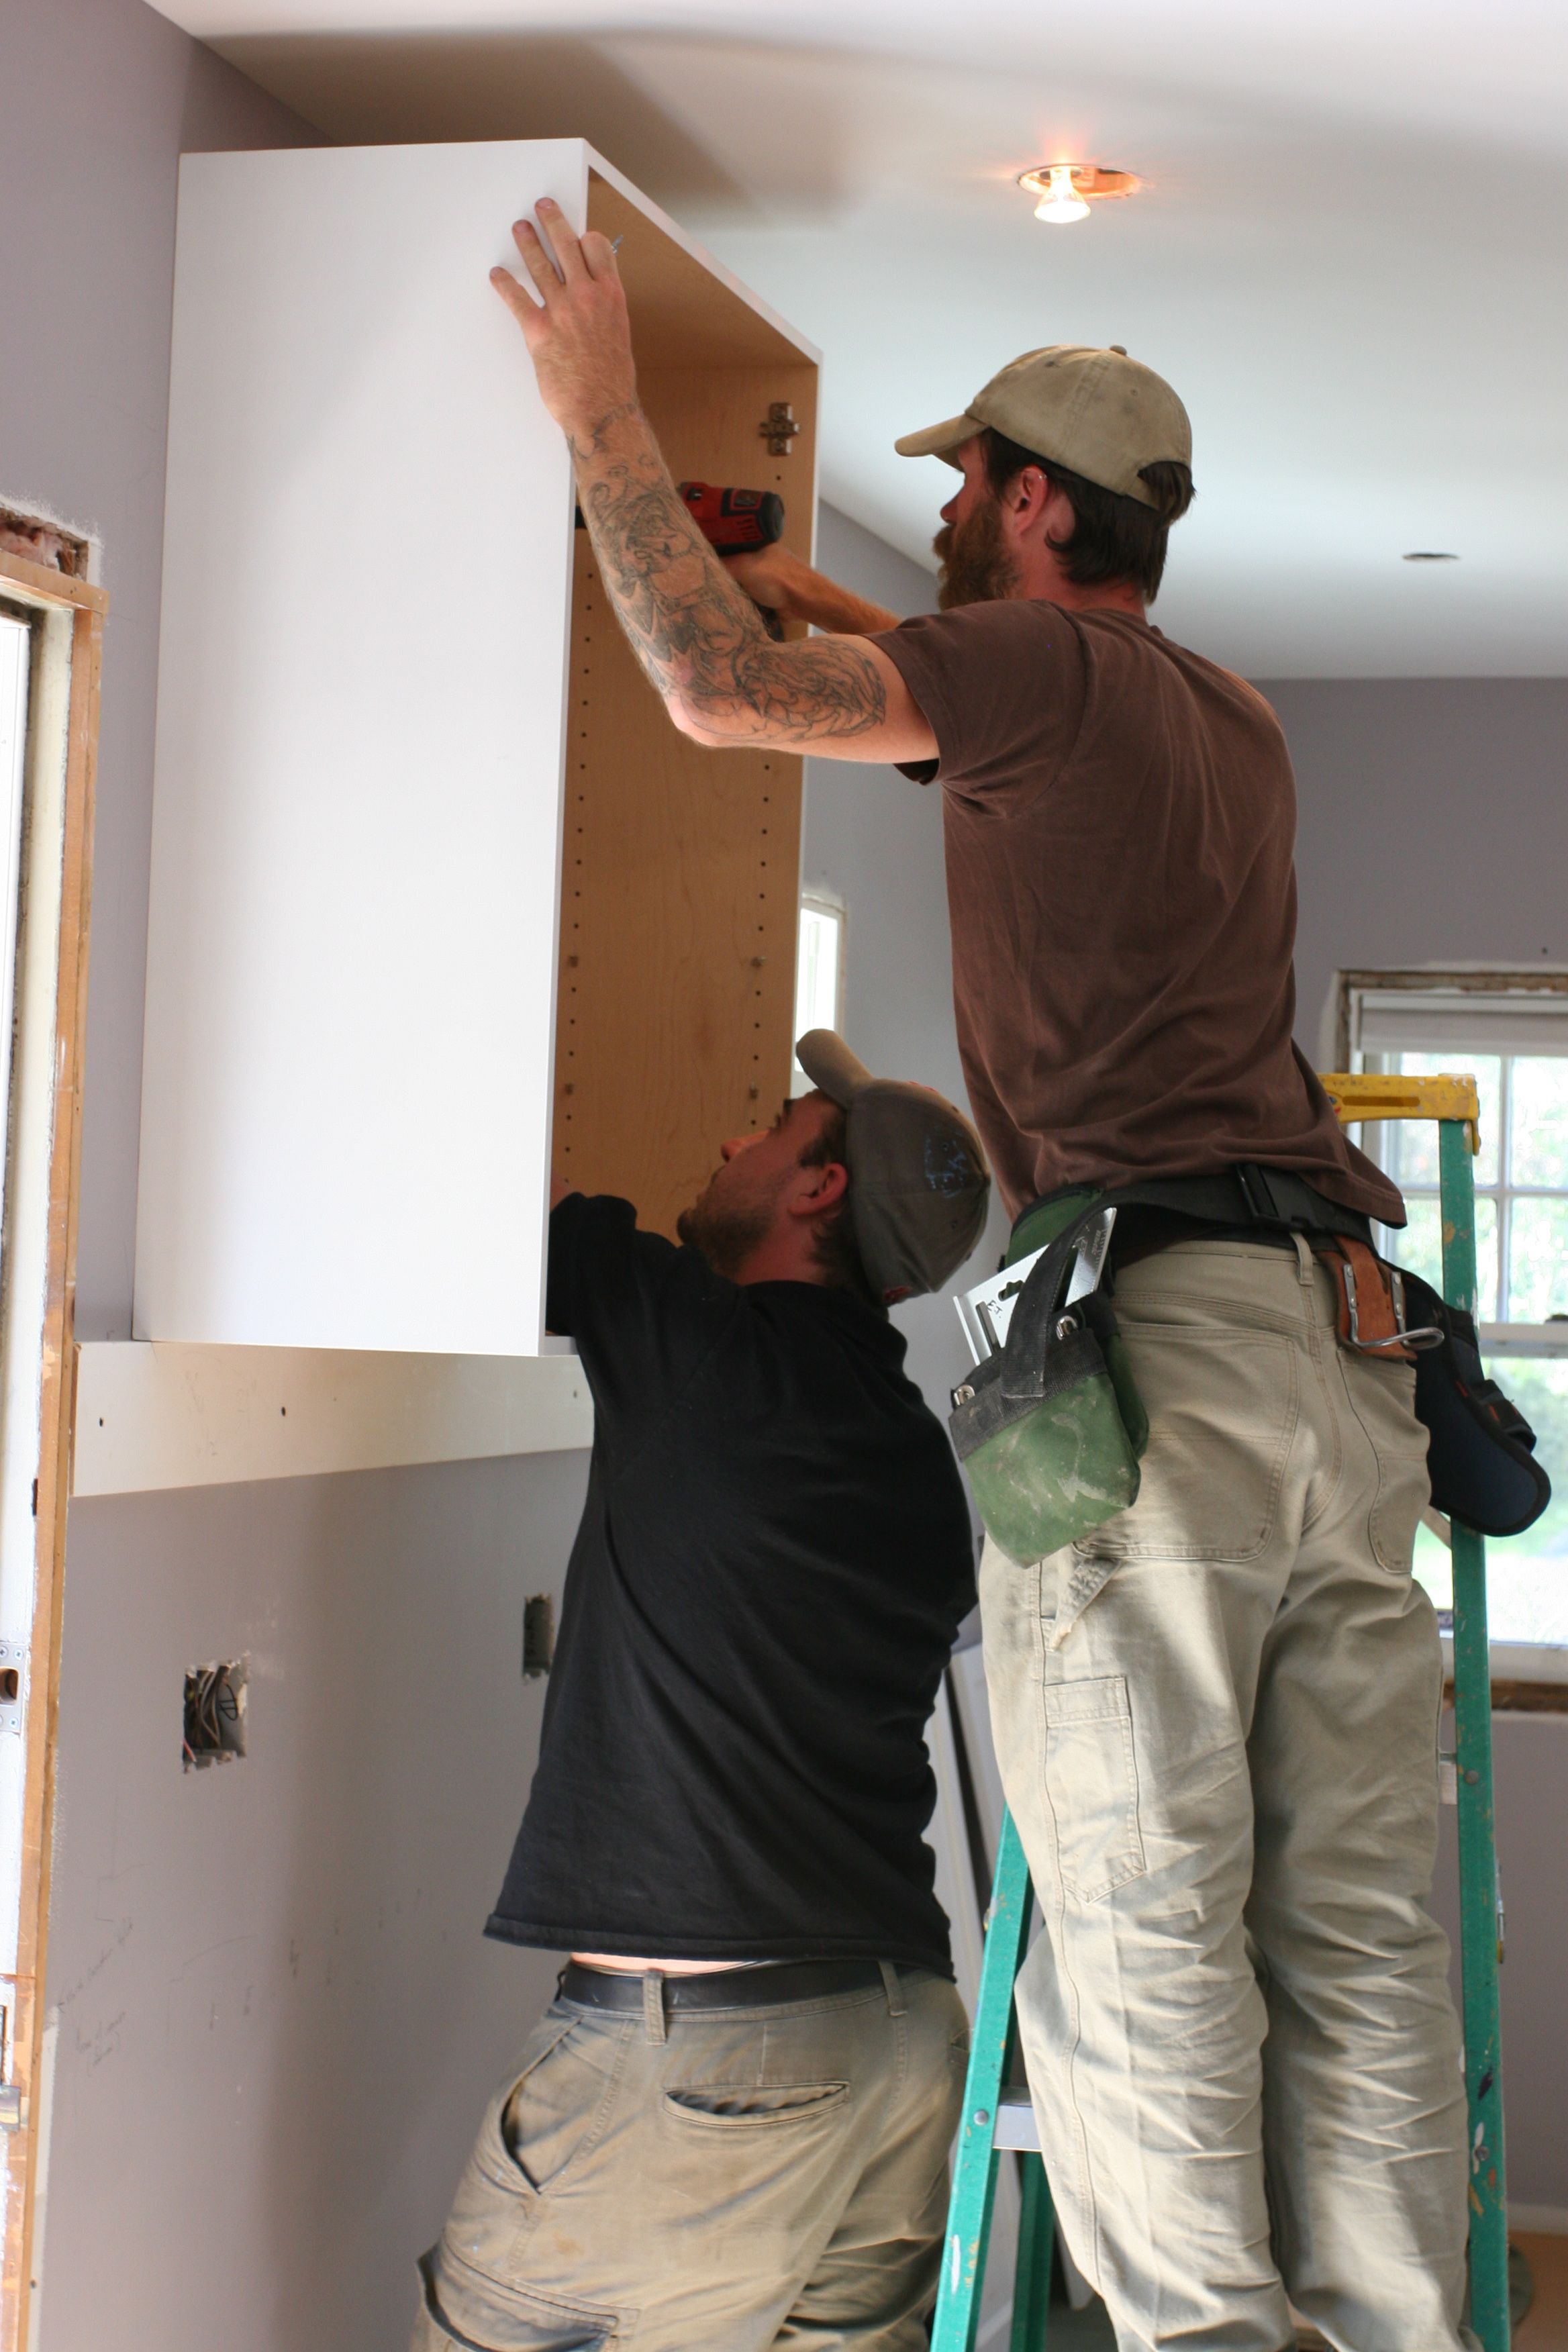 Attaching the cabinet to the blocking that they put in the walls in anticipation of cabinet needs. Smart fellas.